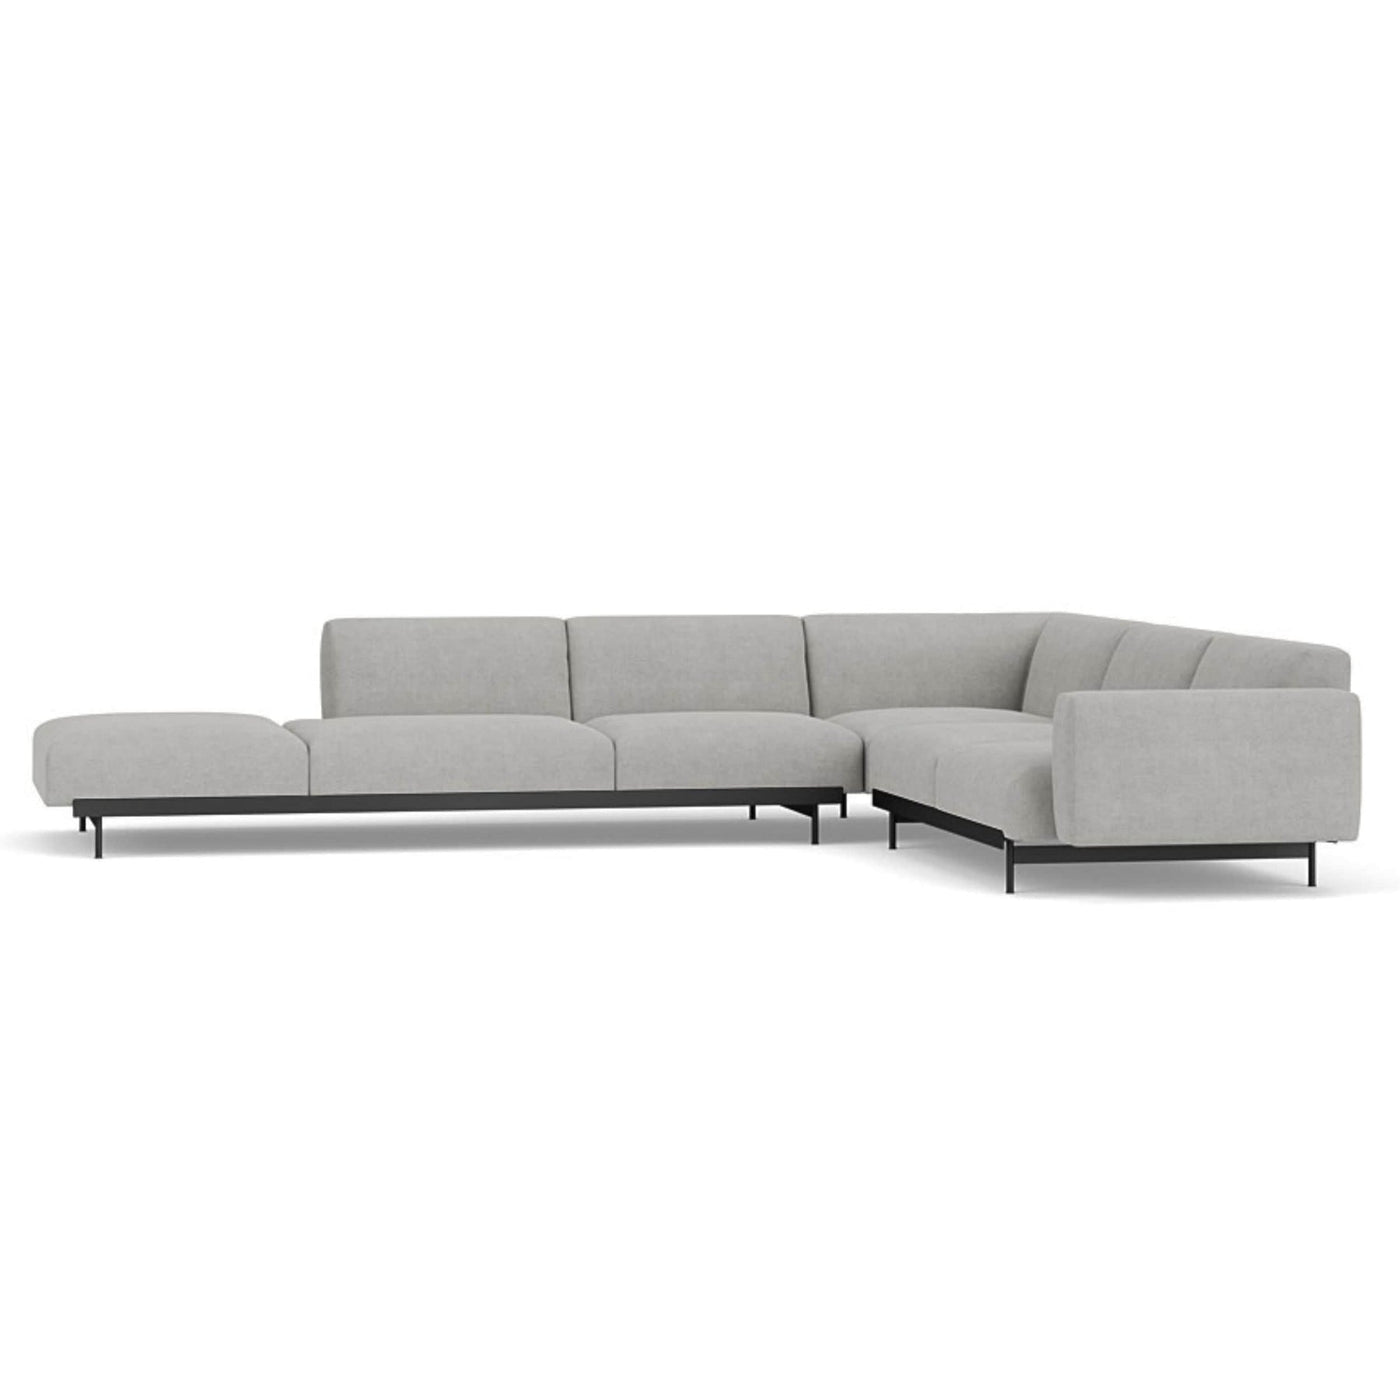 Muuto In Situ Modular Corner Sofa 6. Made to order  from someday designs. #colour_fiord-151